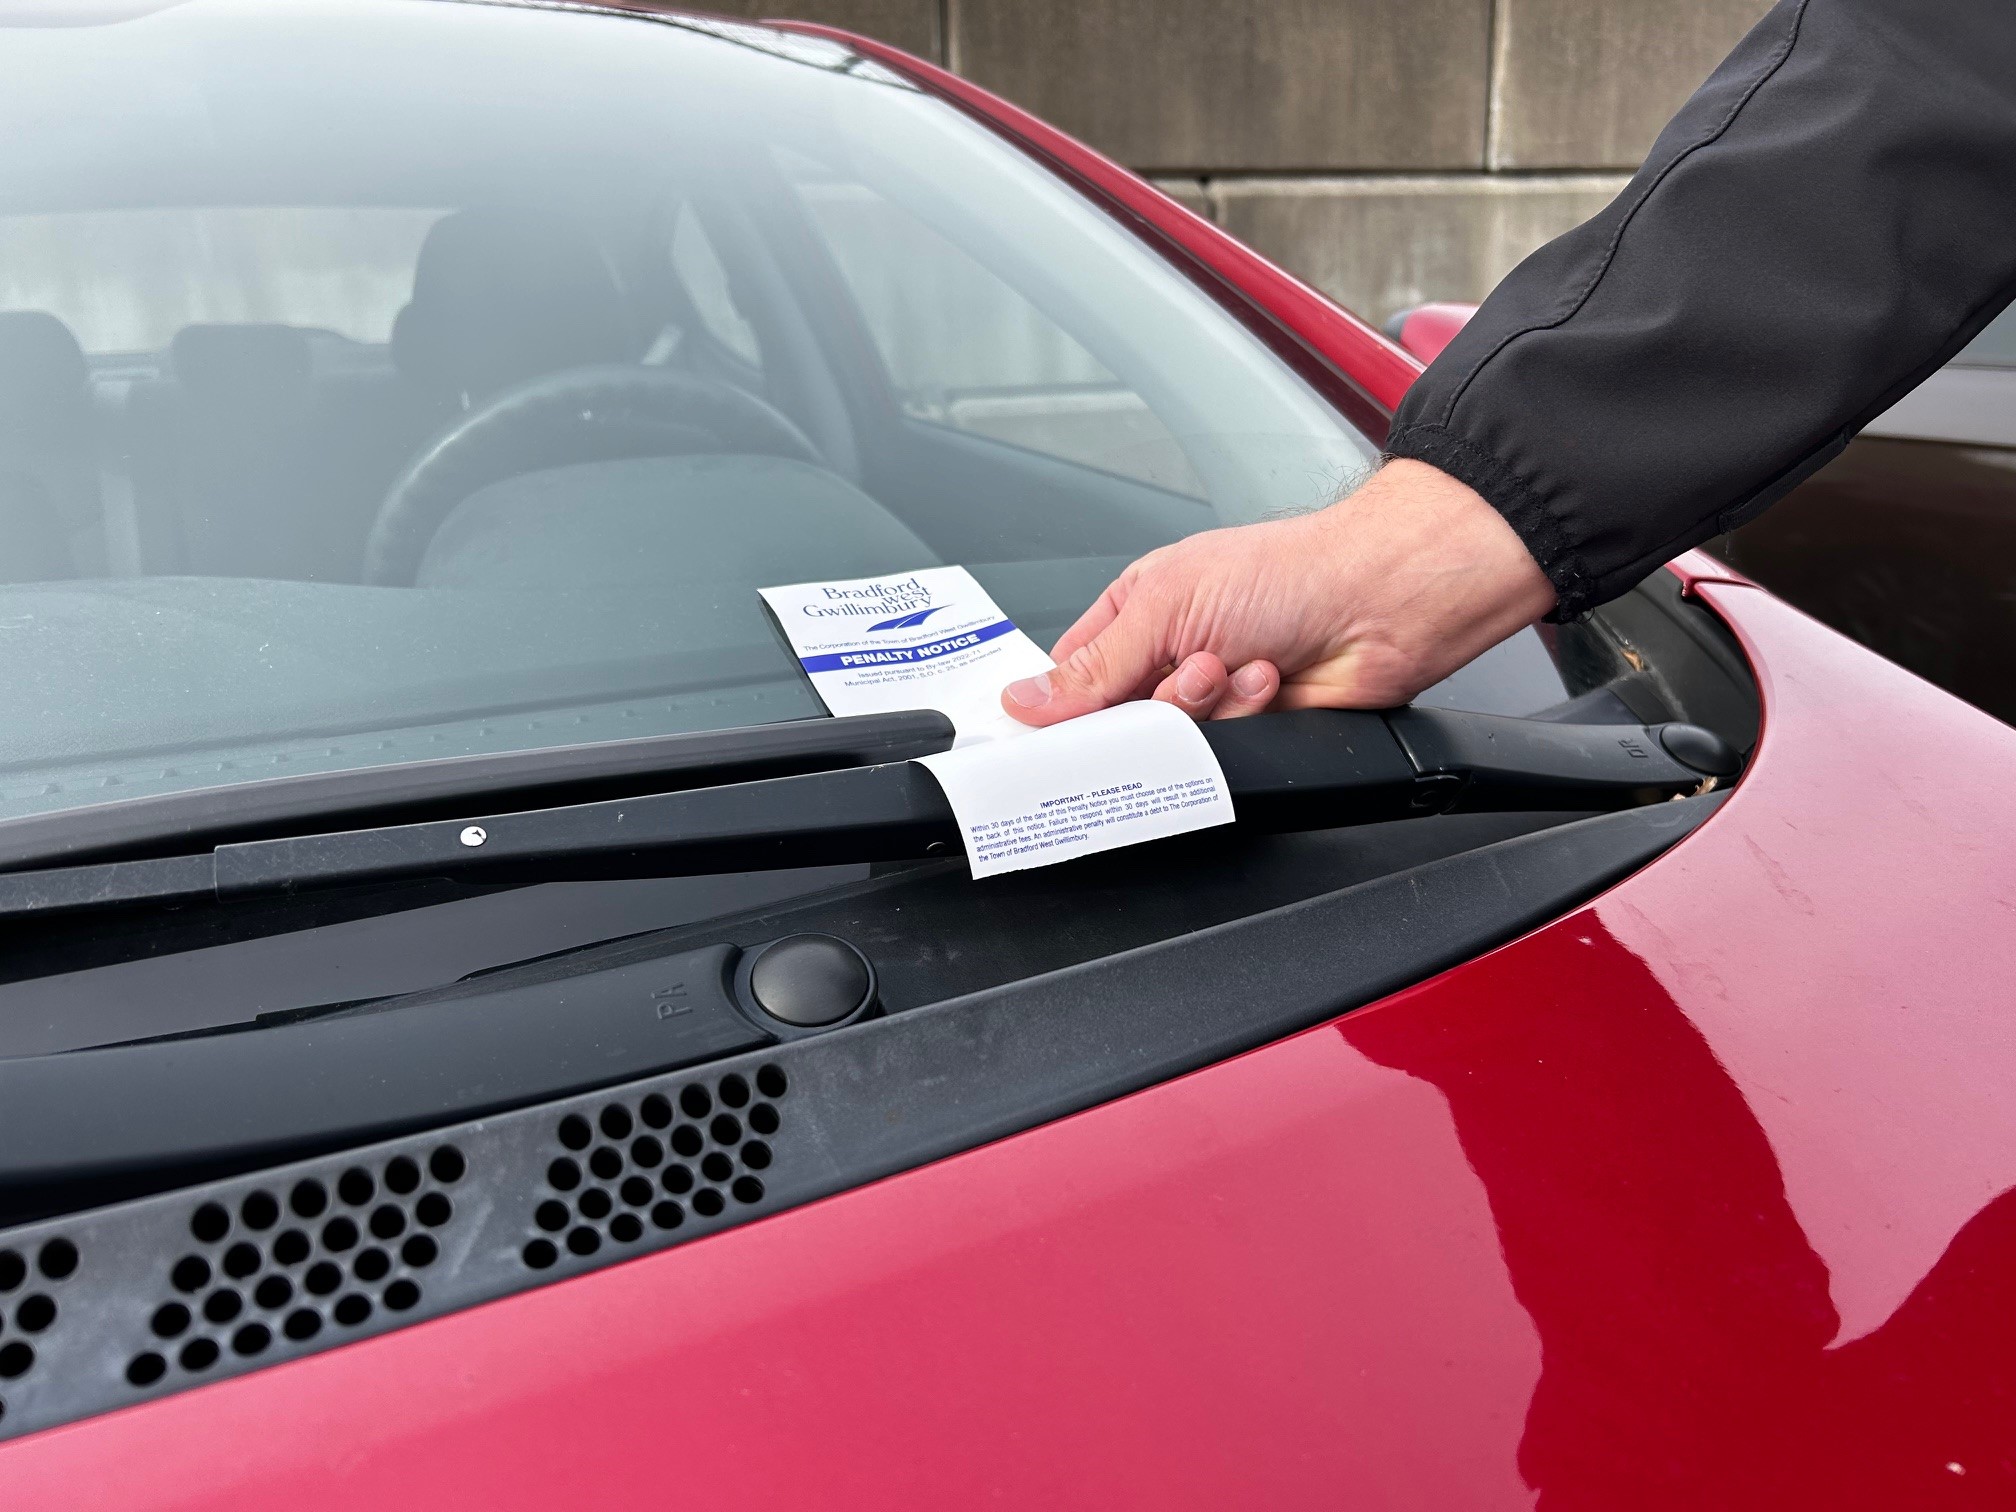 Enforcement officer putting a parking ticket on the front windshield of a red car